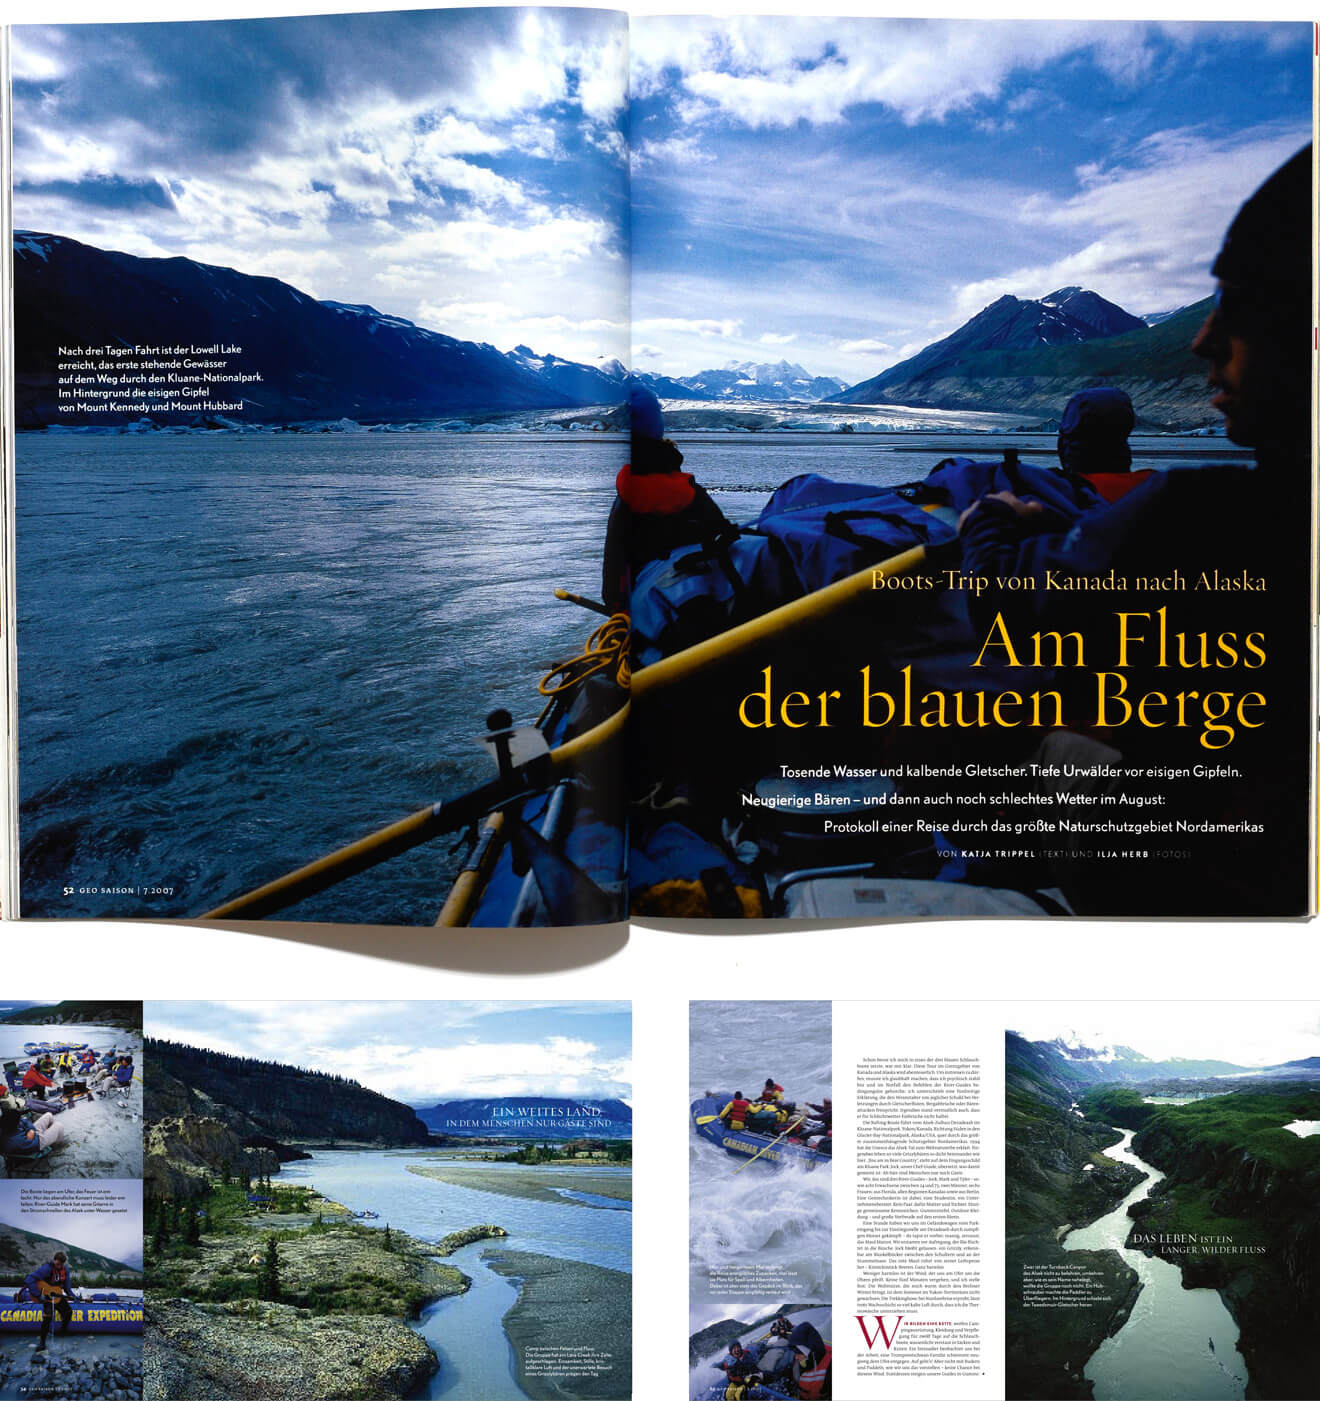 Layouts for an article about Kluane National Park and Reserve.